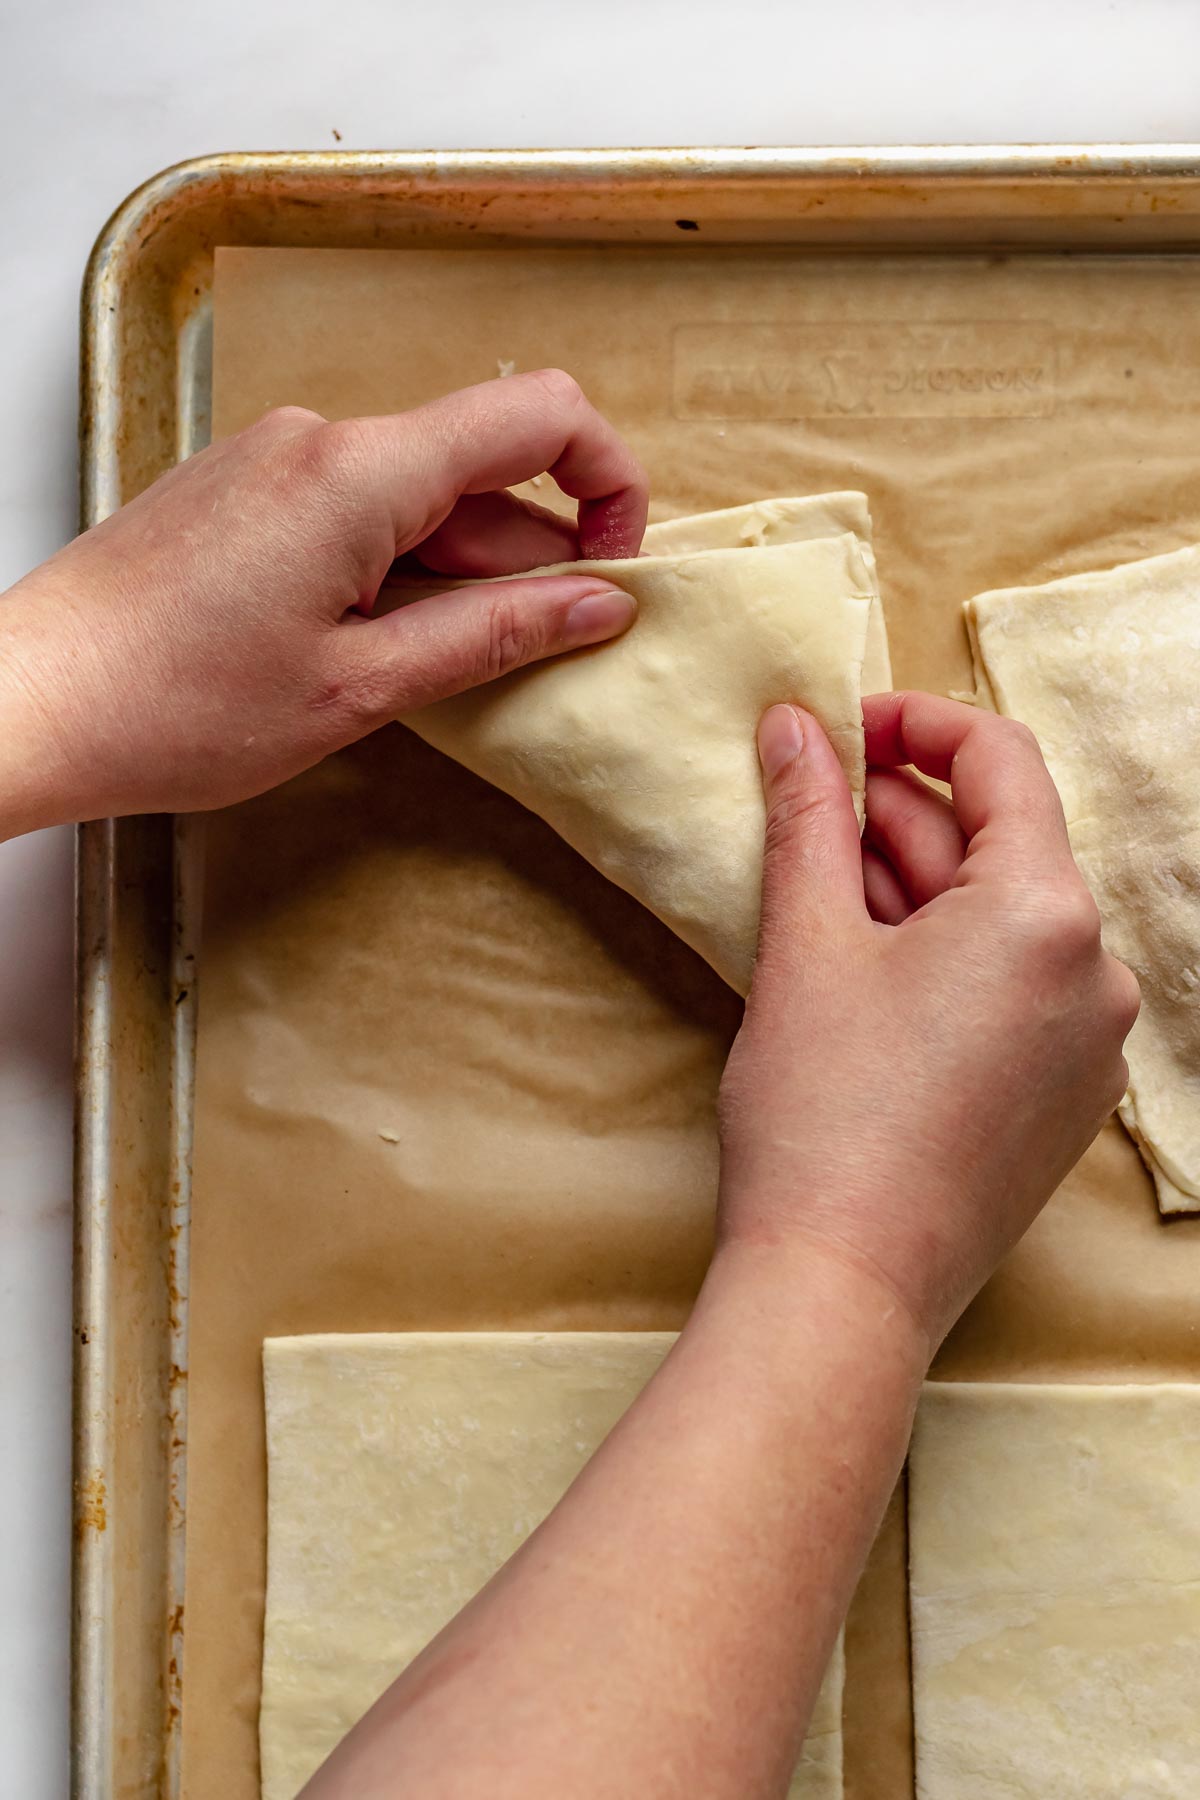 Hands close the pastry over the ham and cheese filling.